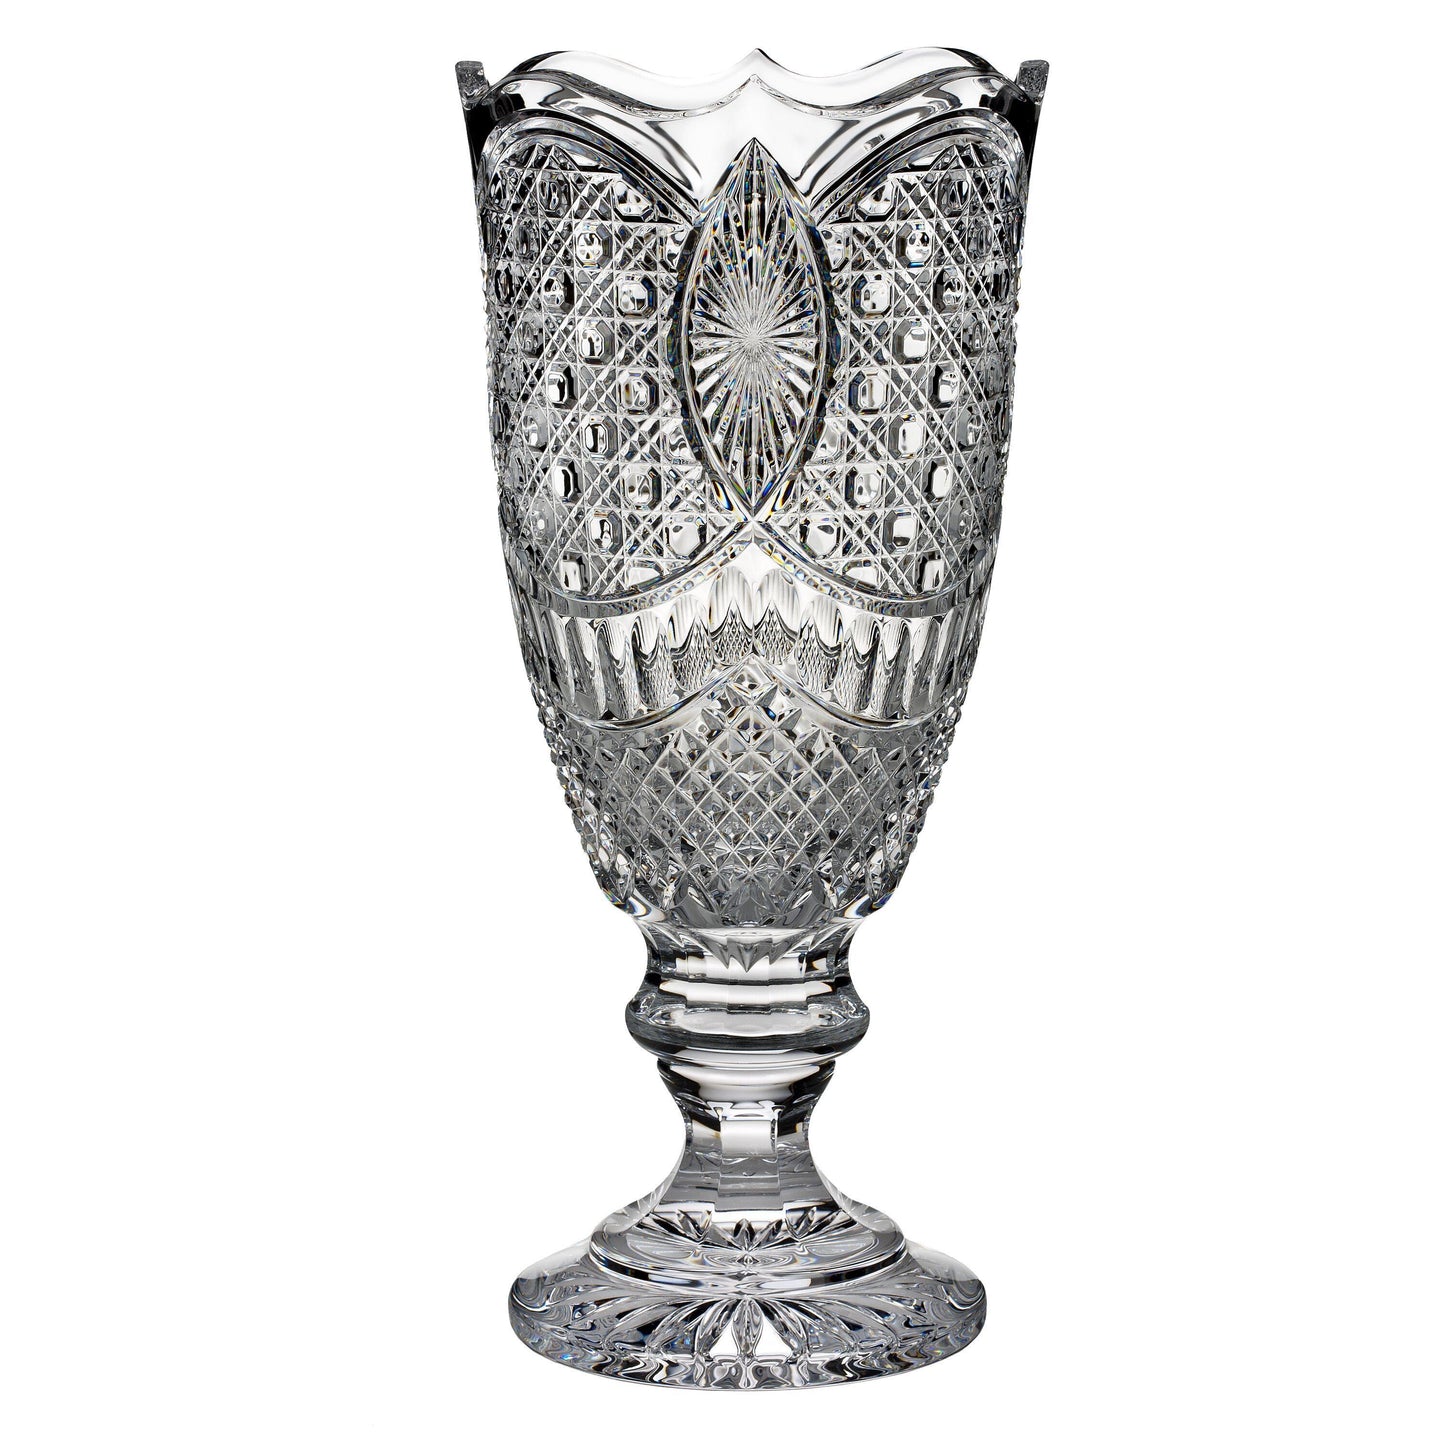 18" Wicker Vase and 12" Wicker Centrepiece Bowl SET (Waterford Crystal)